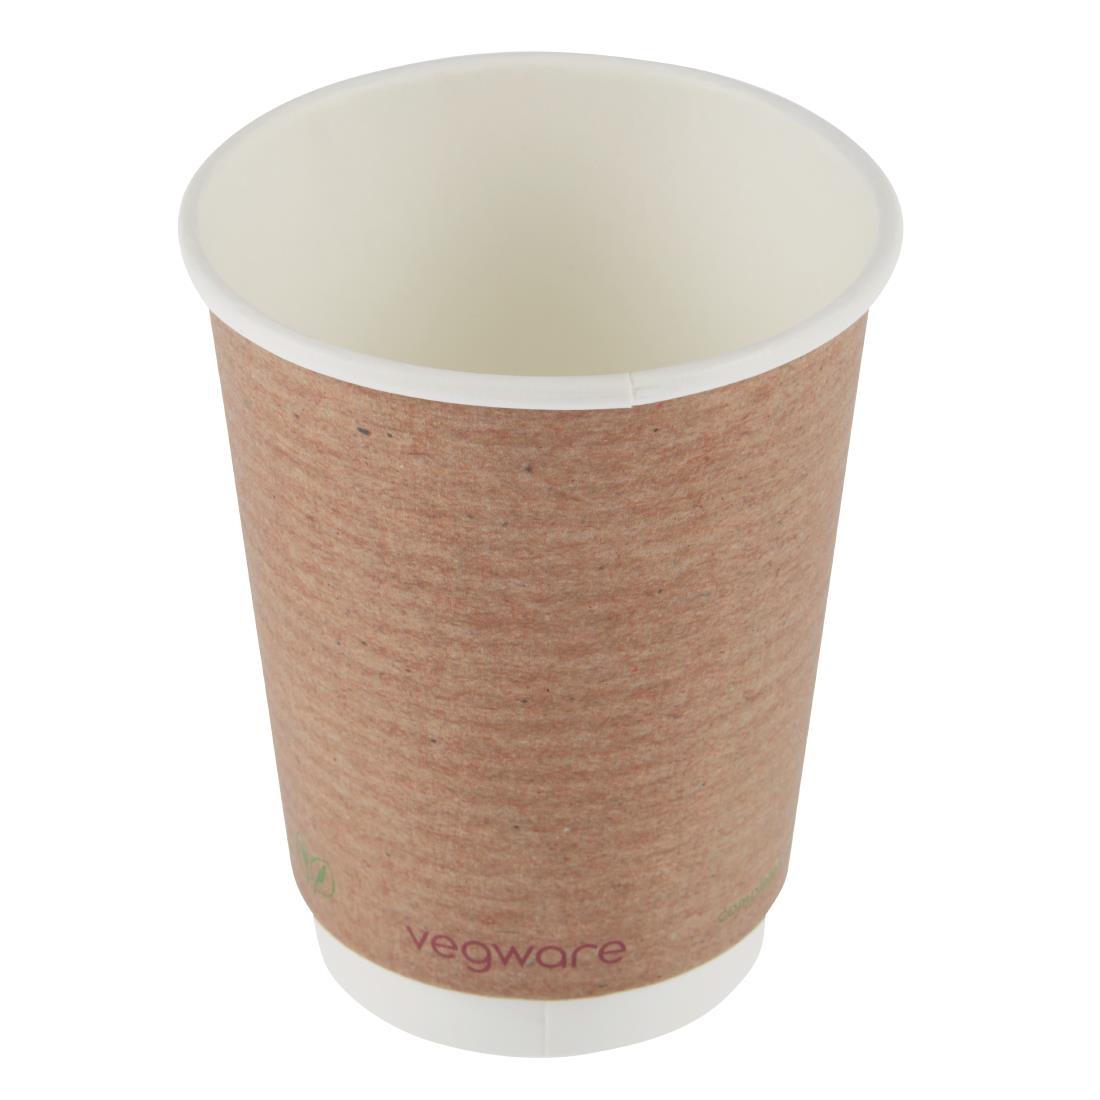 Vegware Compostable Coffee Cups Double Wall 340ml / 12oz (Pack of 500) - GH021  - 1